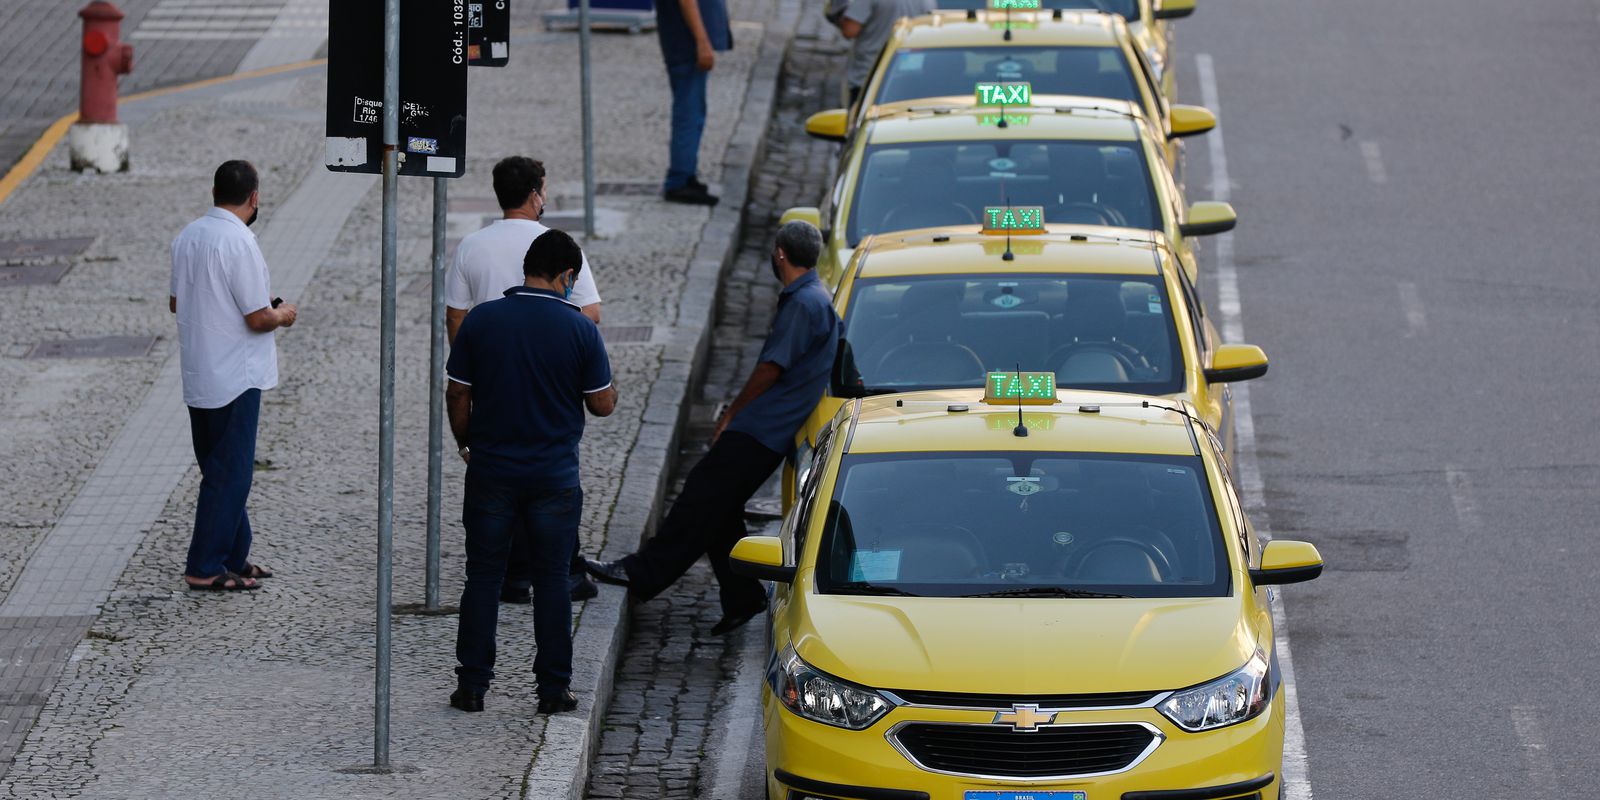 Repechage of Taxi Assistance will be paid today